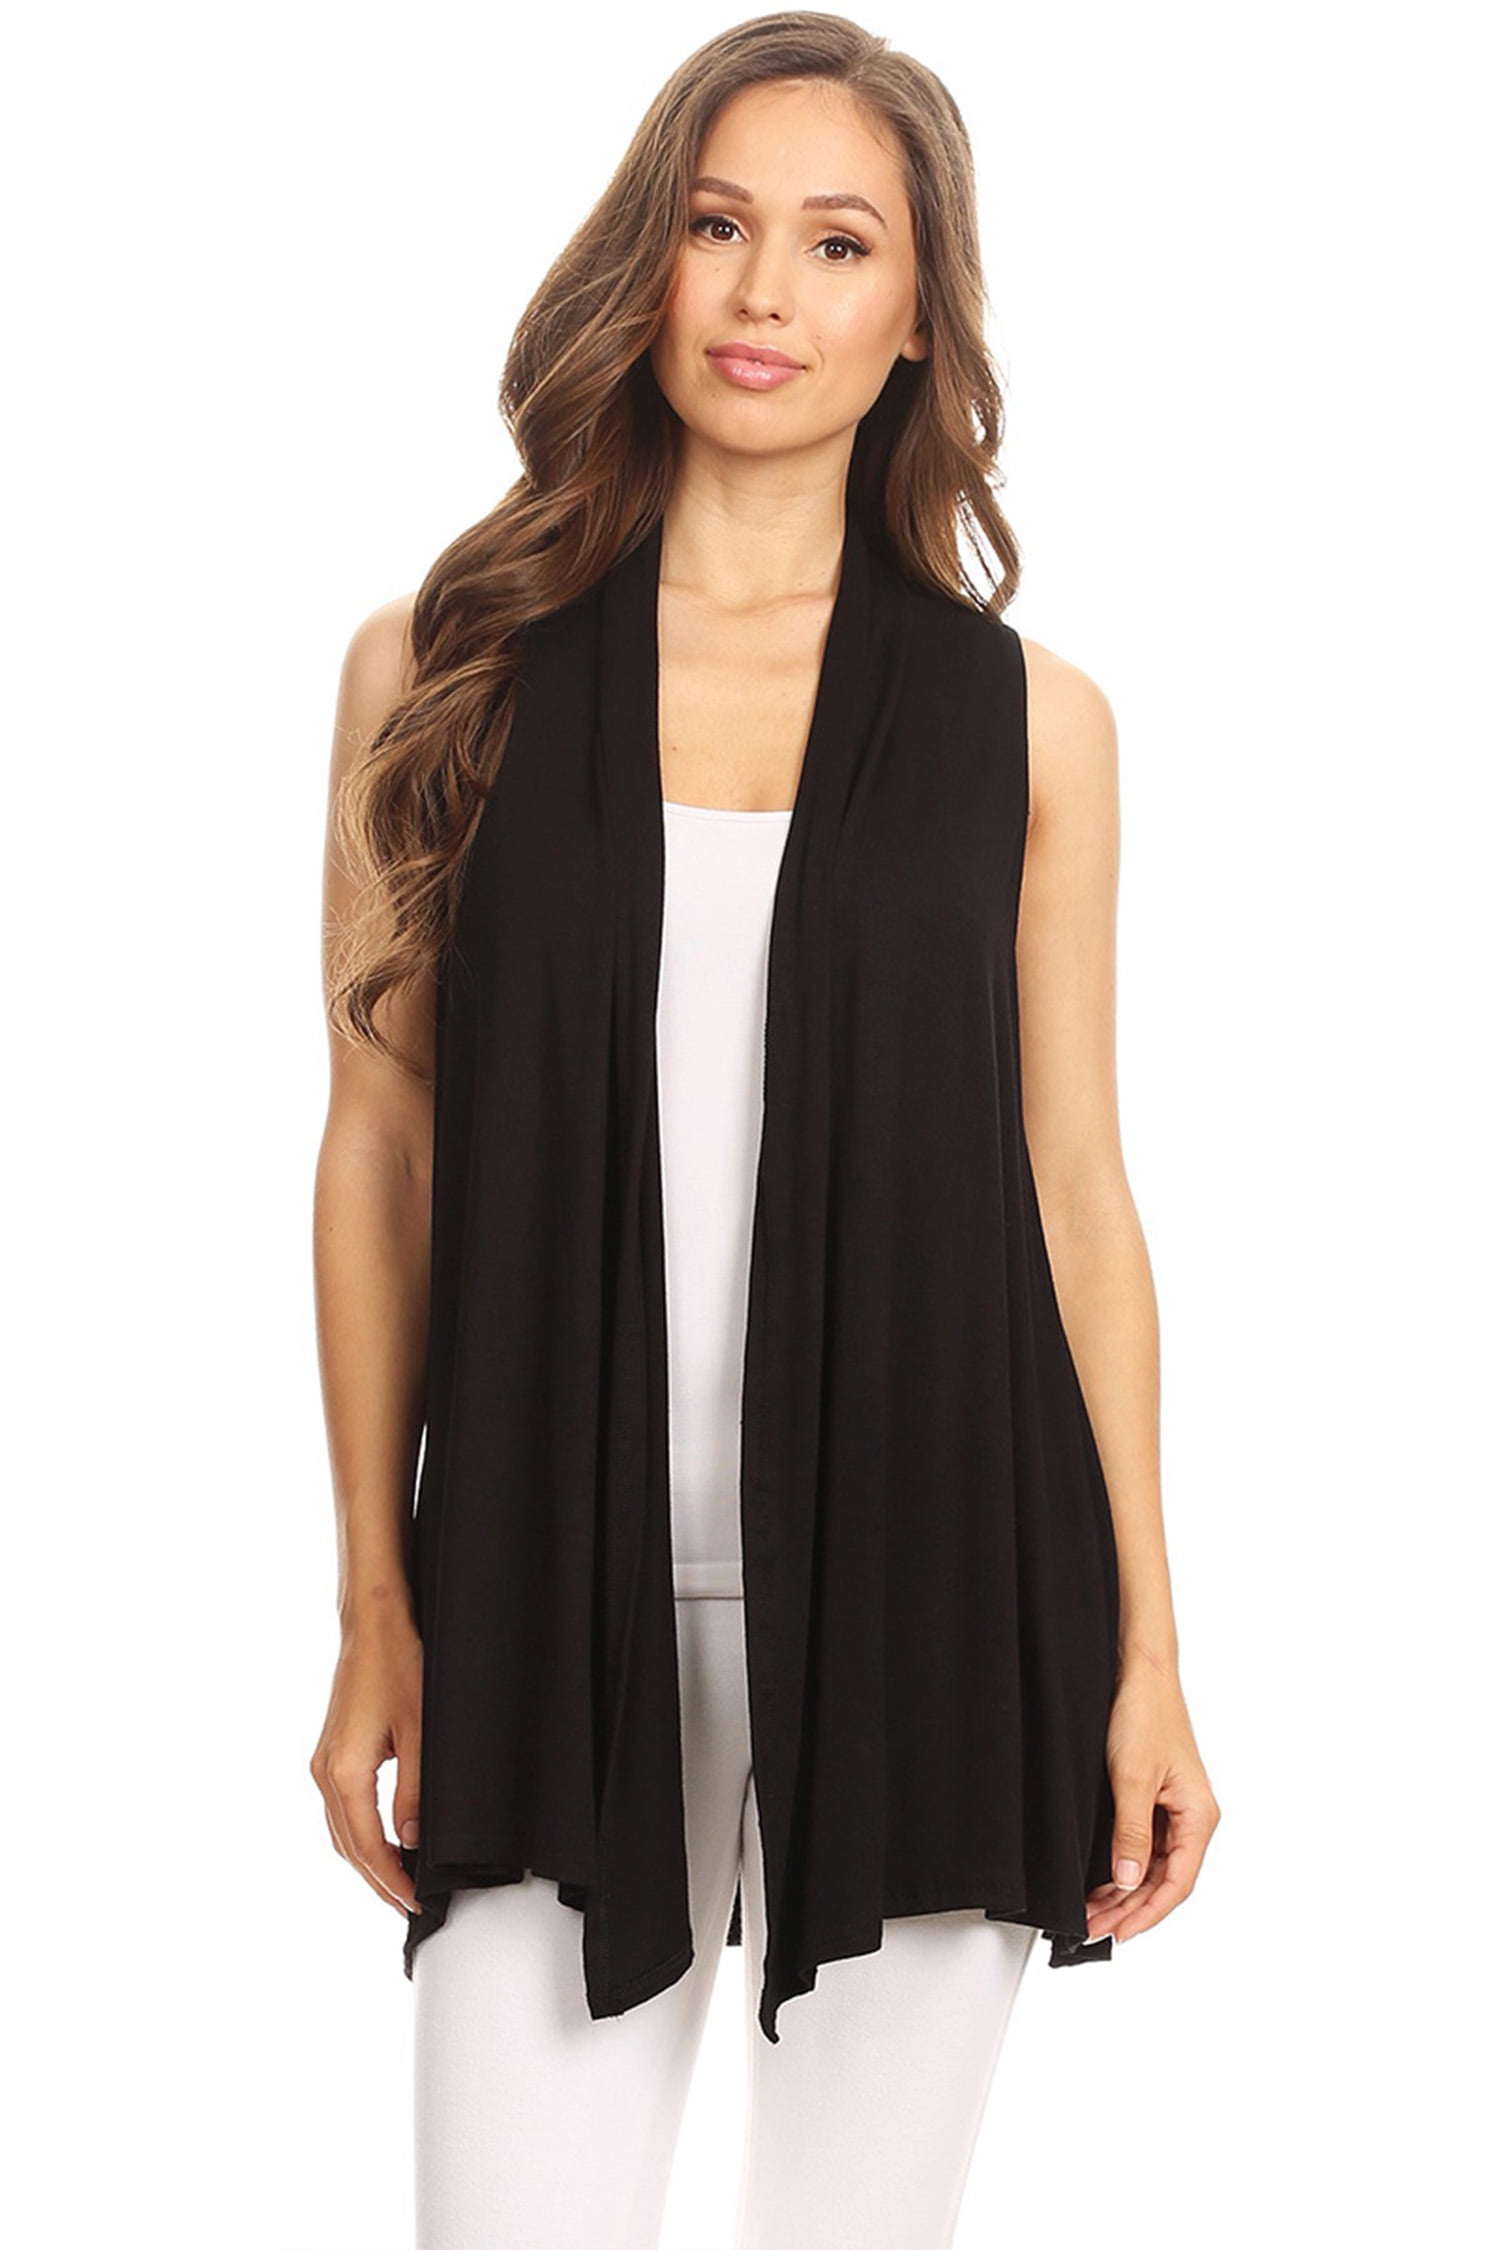 Women's Sleeveless Draped Open Front Cardigan Vest Made in USA ...